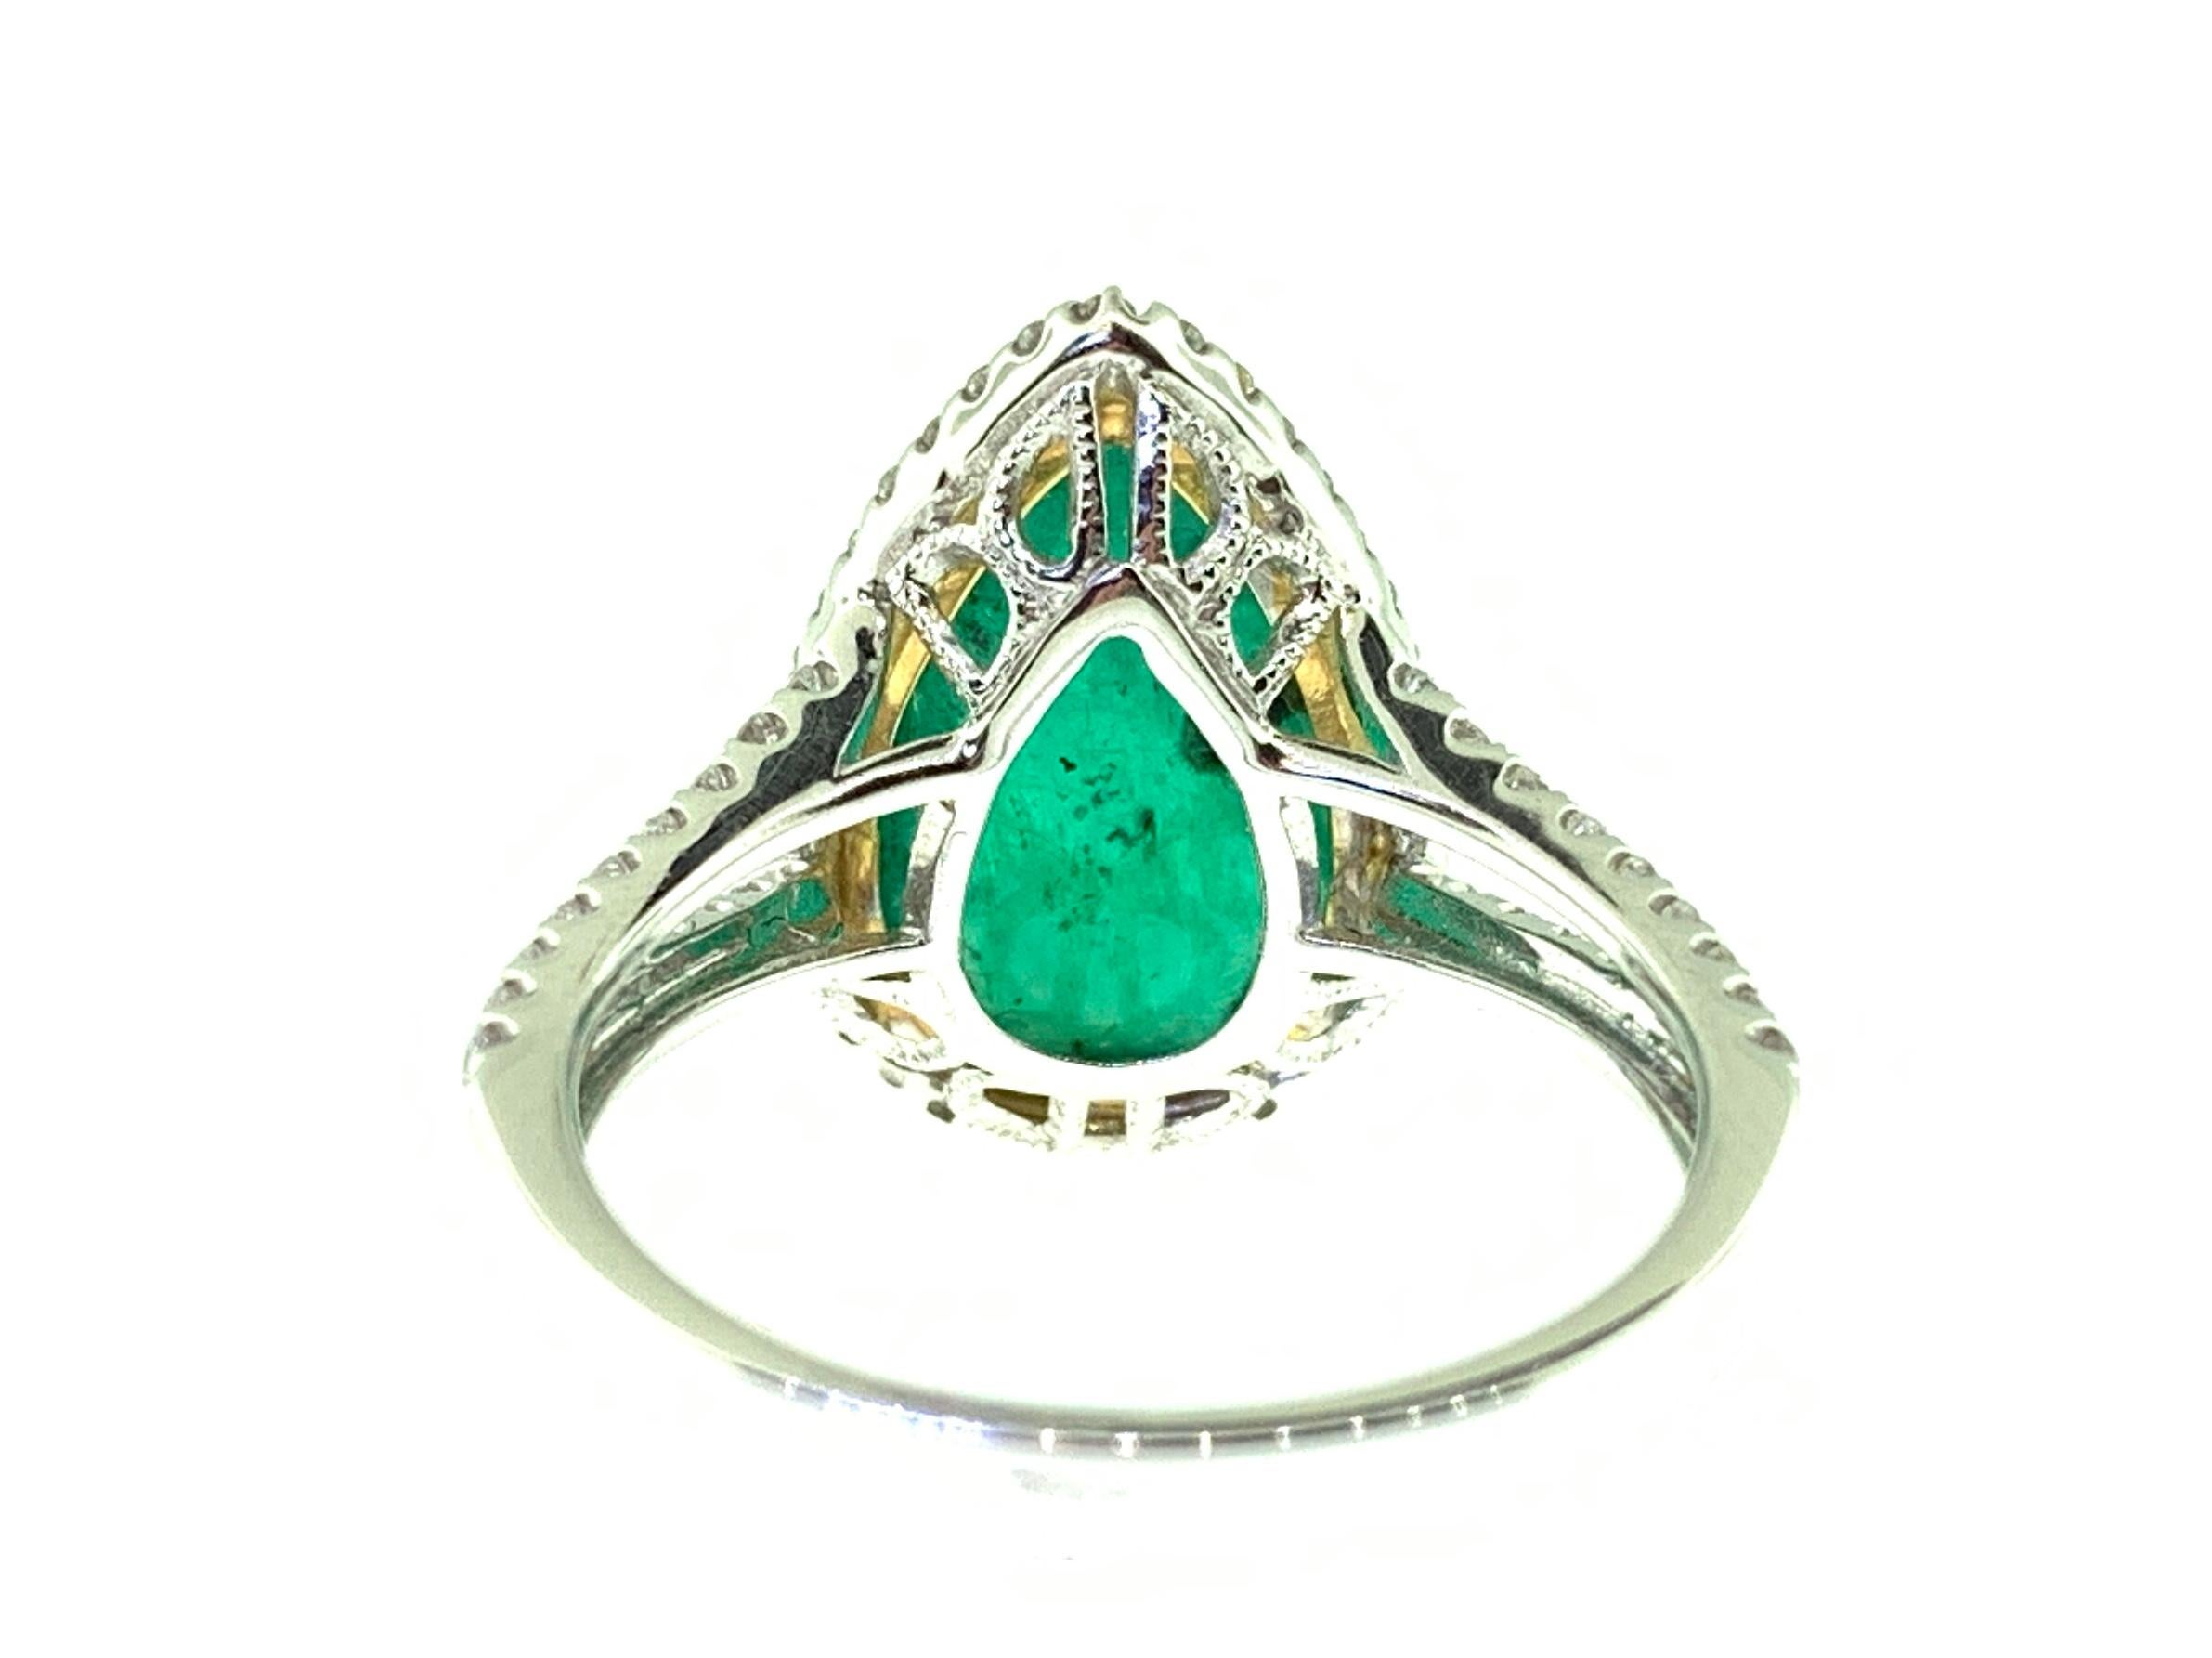 Women's 3.84 Carat Emerald and Diamond Cocktail Ring